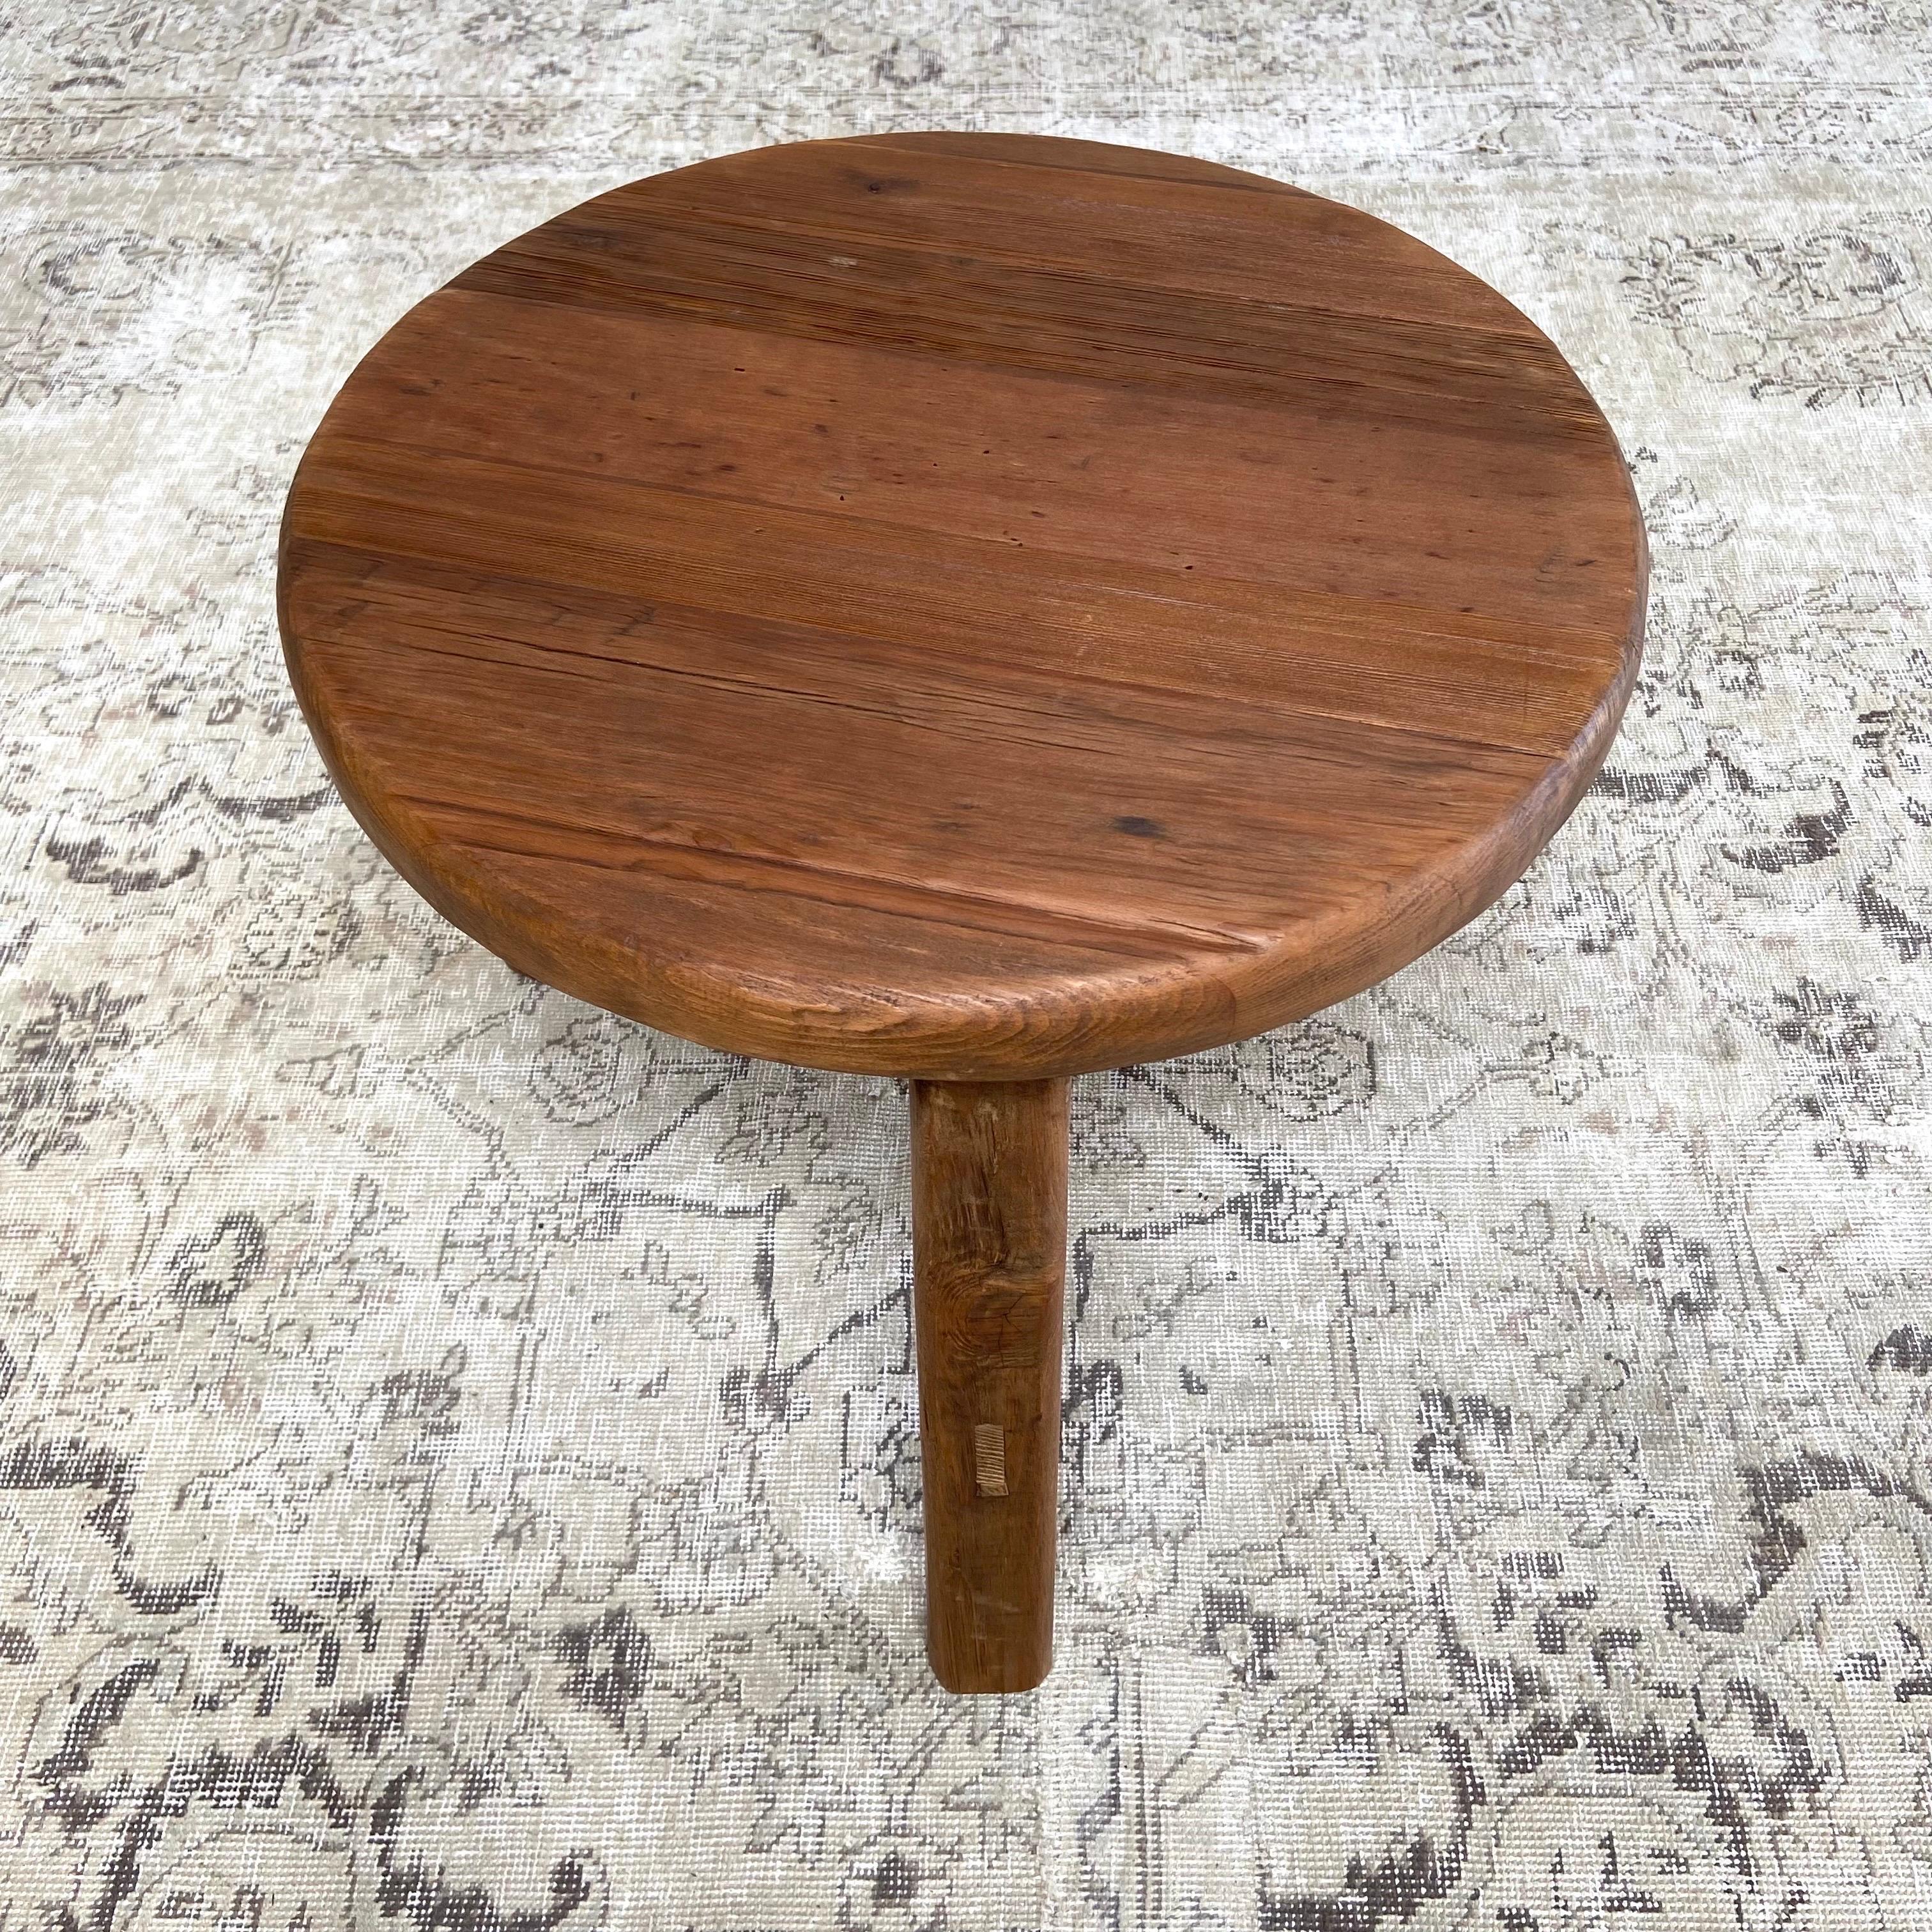 Round Elm wood side table
multiple quantities available.
custom dark walnut stain, solid elm wood, made by bloom home inc.
Solid and sturdy, great for use next to a sofa, in between chairs, in a bath, or bedside.
Size:
21” rd. X 18”h.